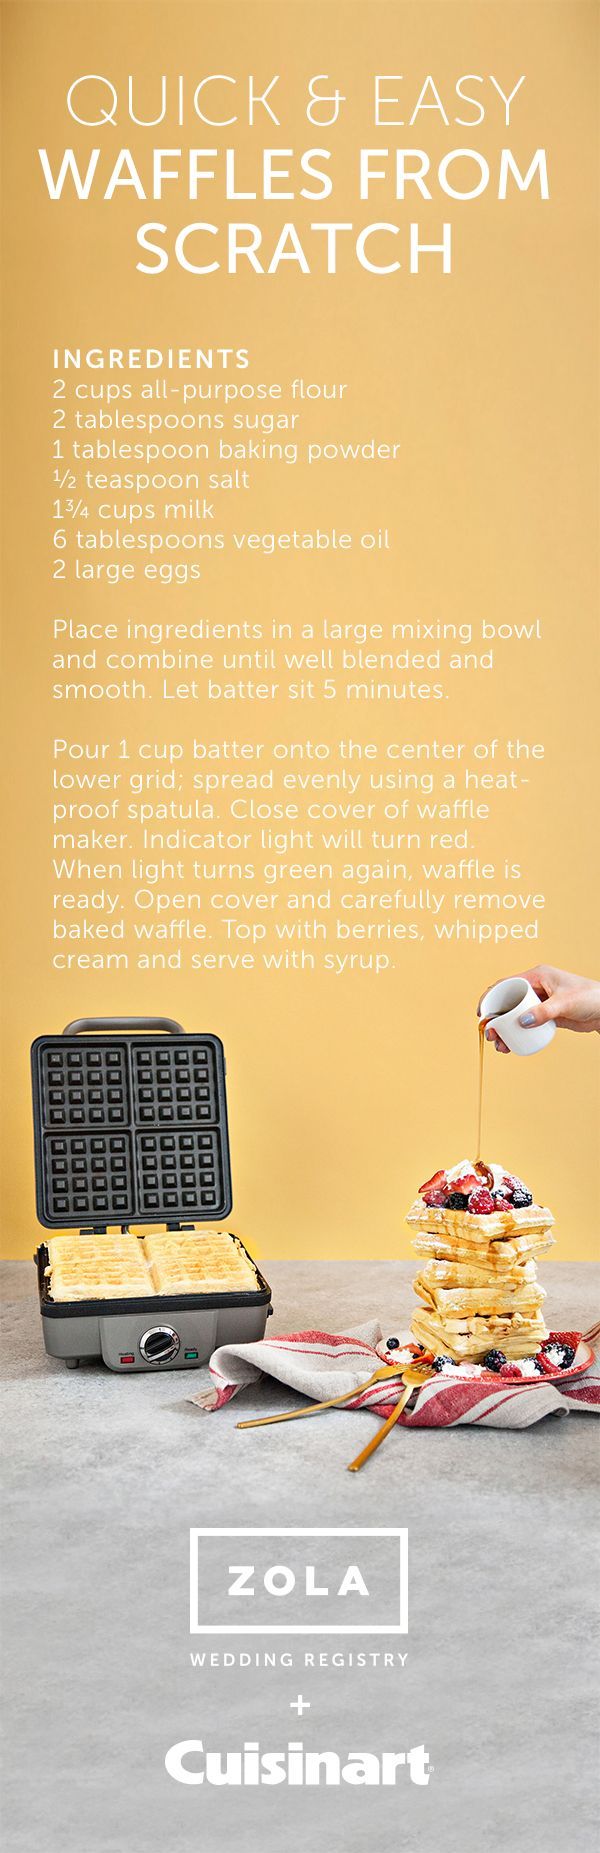 Quick and easy waffles: this is an easy, basic recipe that could be adaptable to w